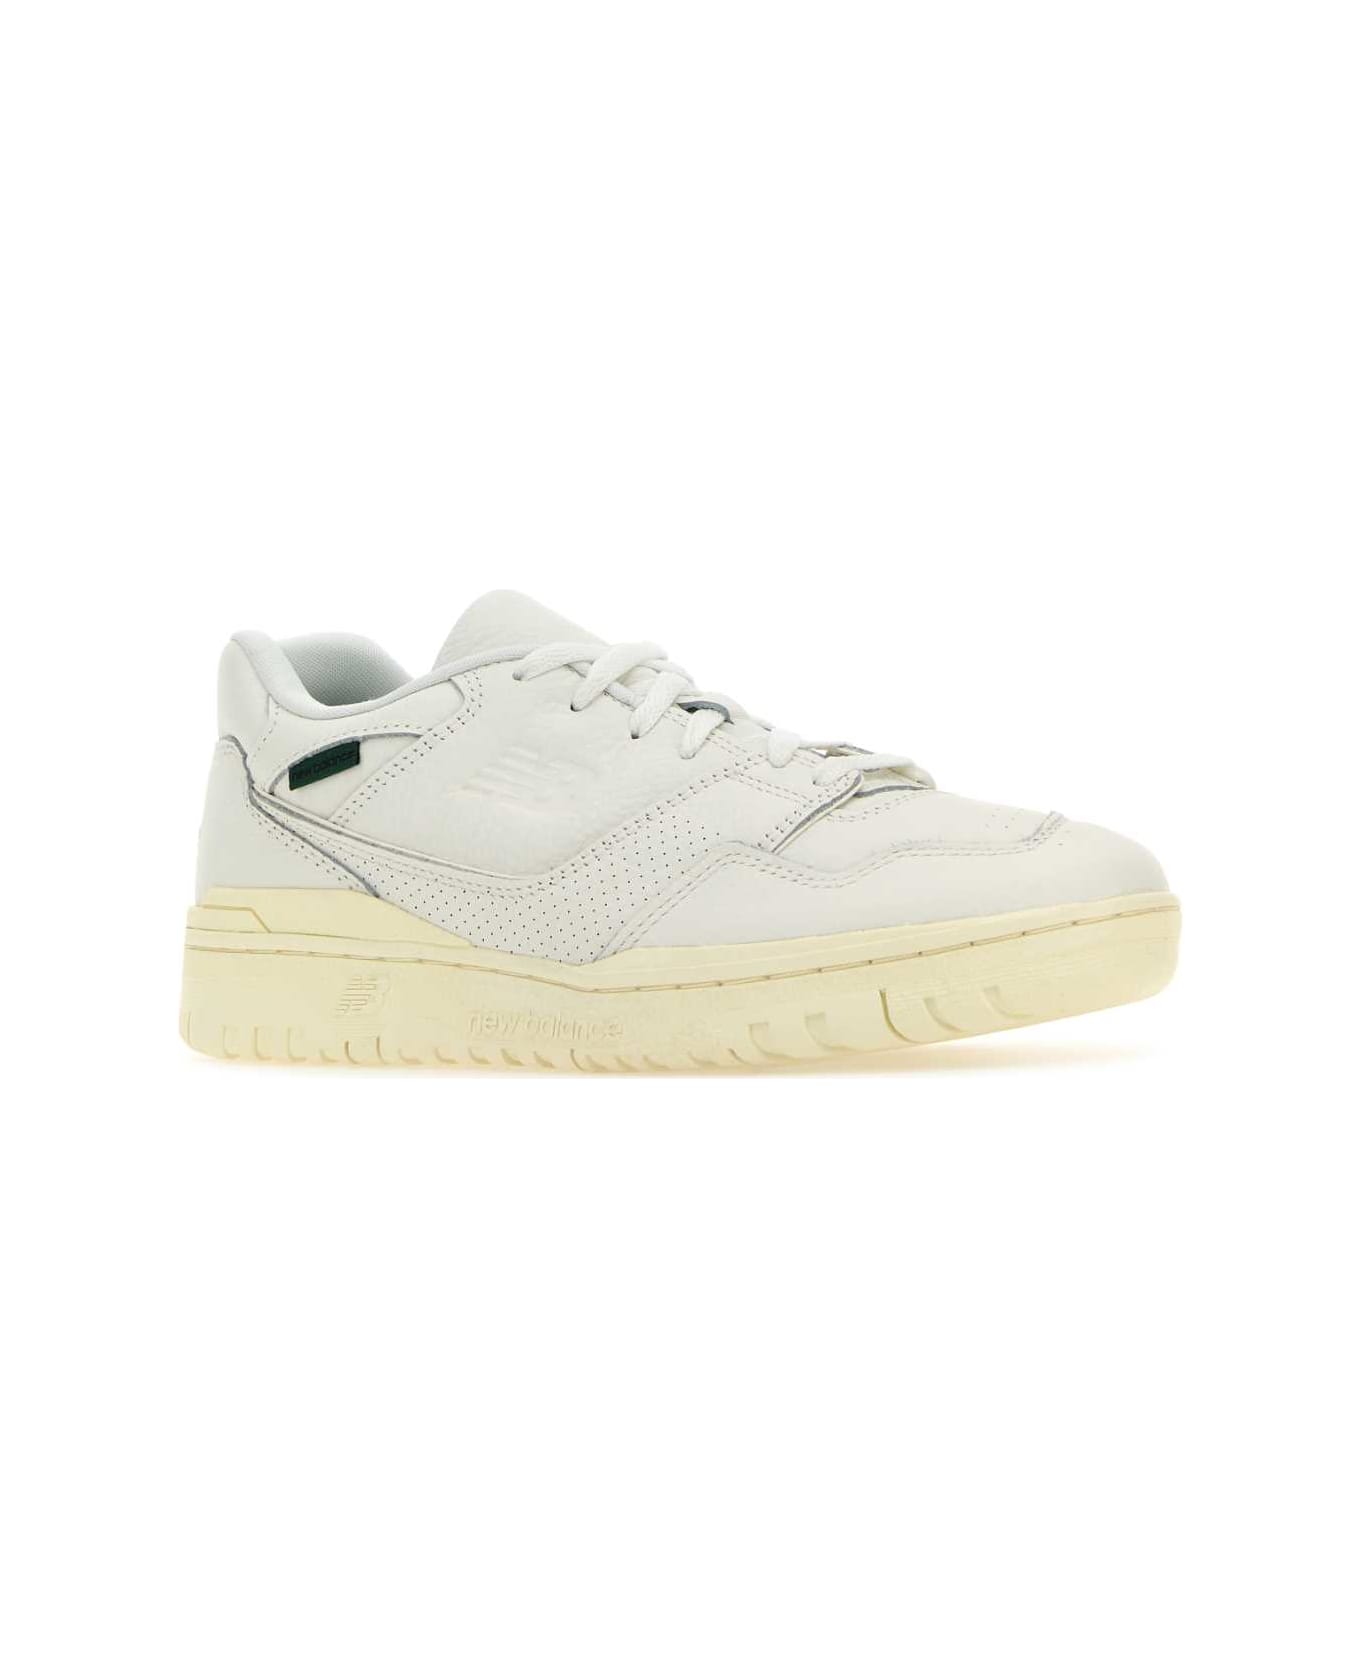 New Balance White Leather 550 Sneakers - SEASALT